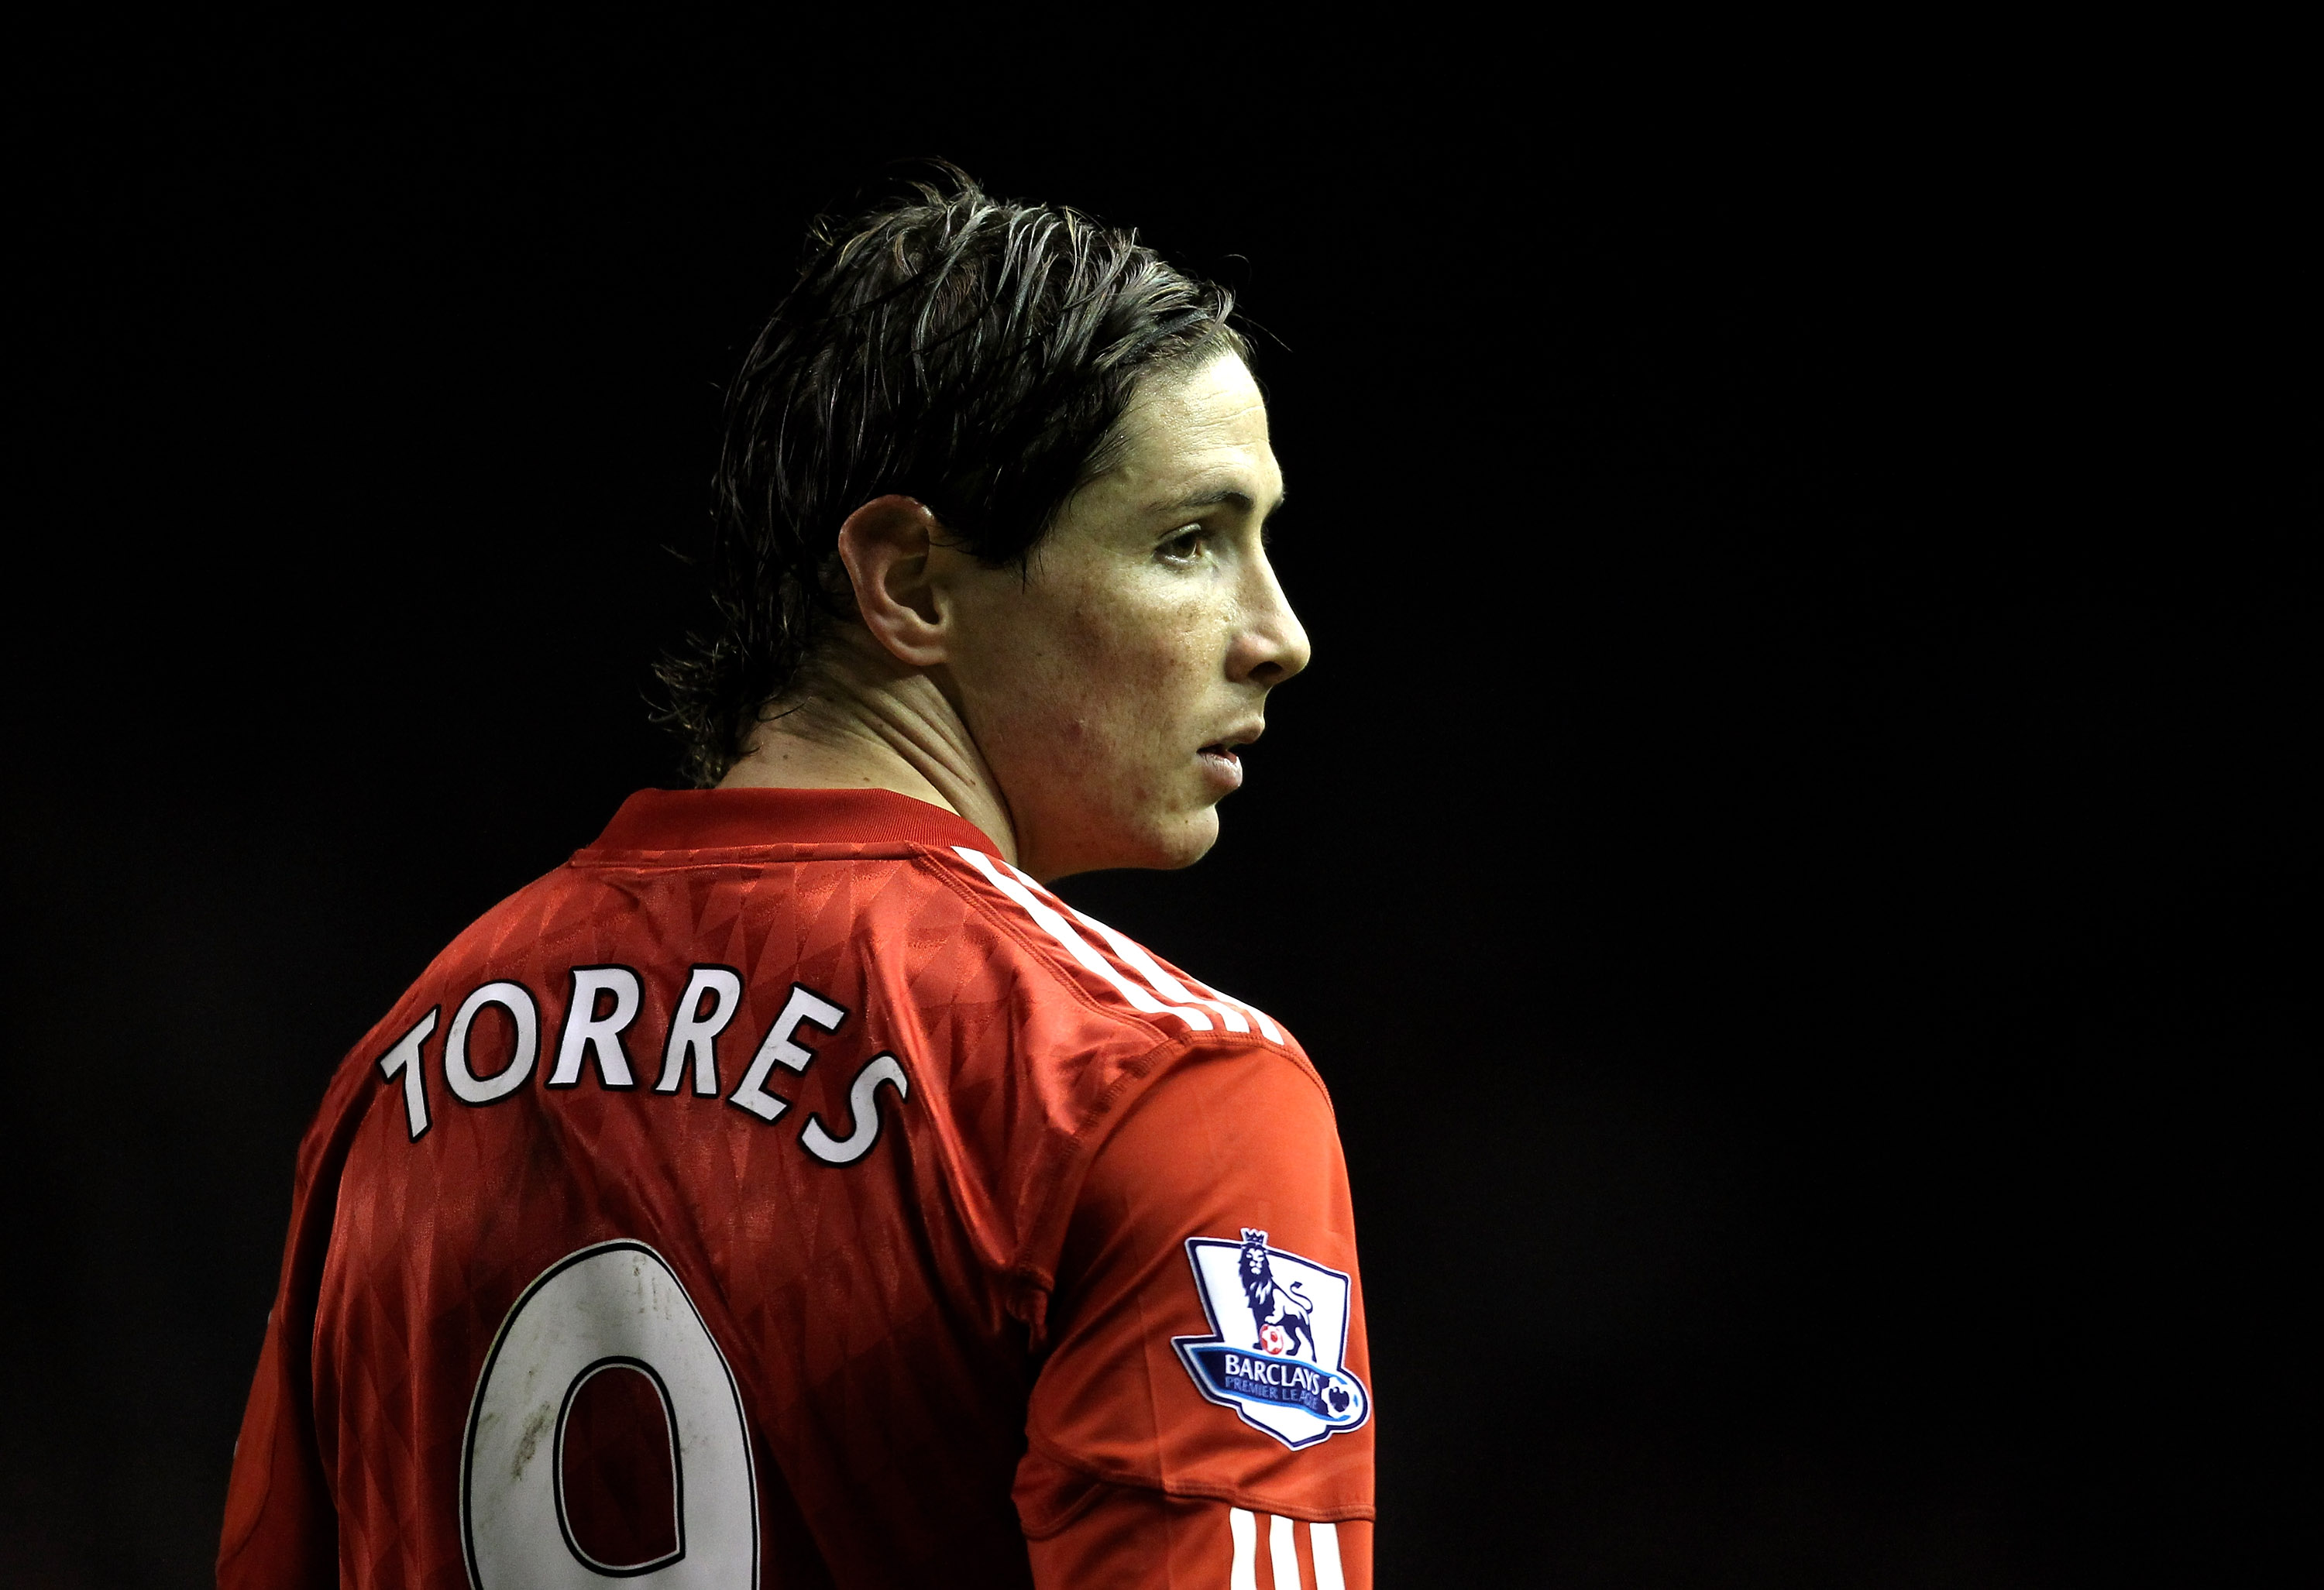 LIVERPOOL, ENGLAND - JANUARY 26:  Fernando Torres of Liverpool looks on during the Barclays Premier League match between Liverpool and Fulham at Anfield on January 26, 2011 in Liverpool, England. (Photo by Alex Livesey/Getty Images)